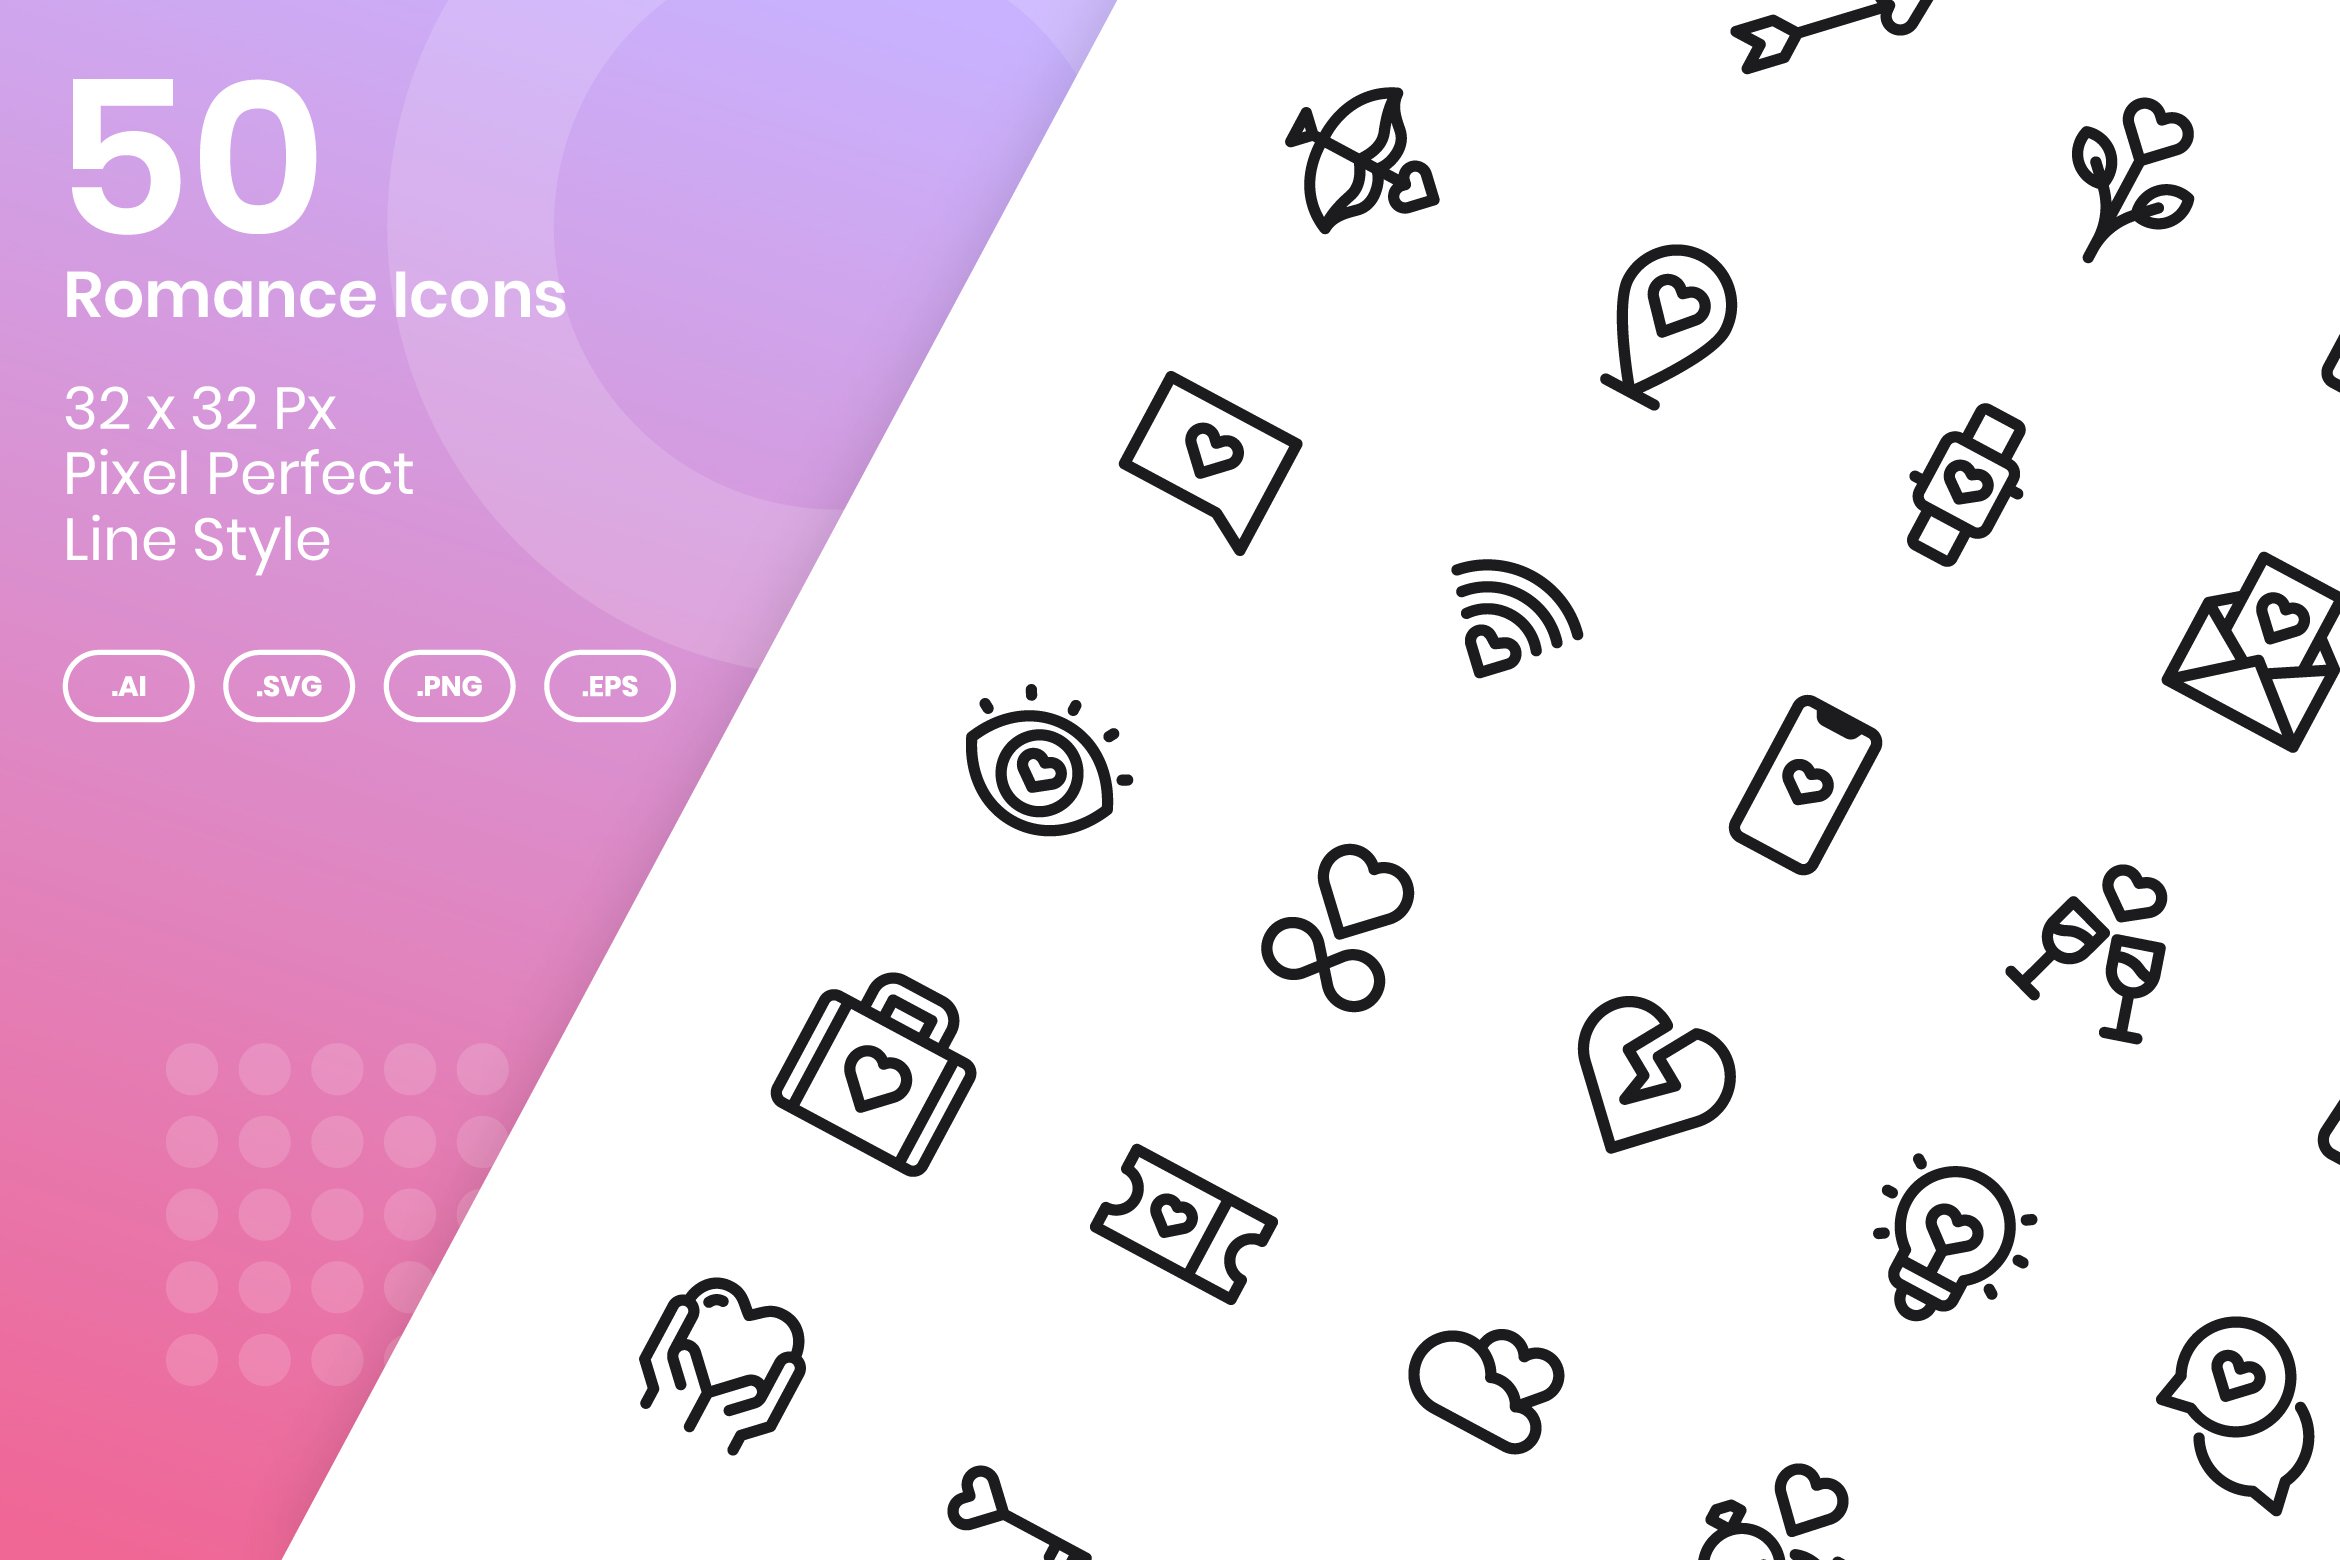 Big line icons collection for your love illustration.